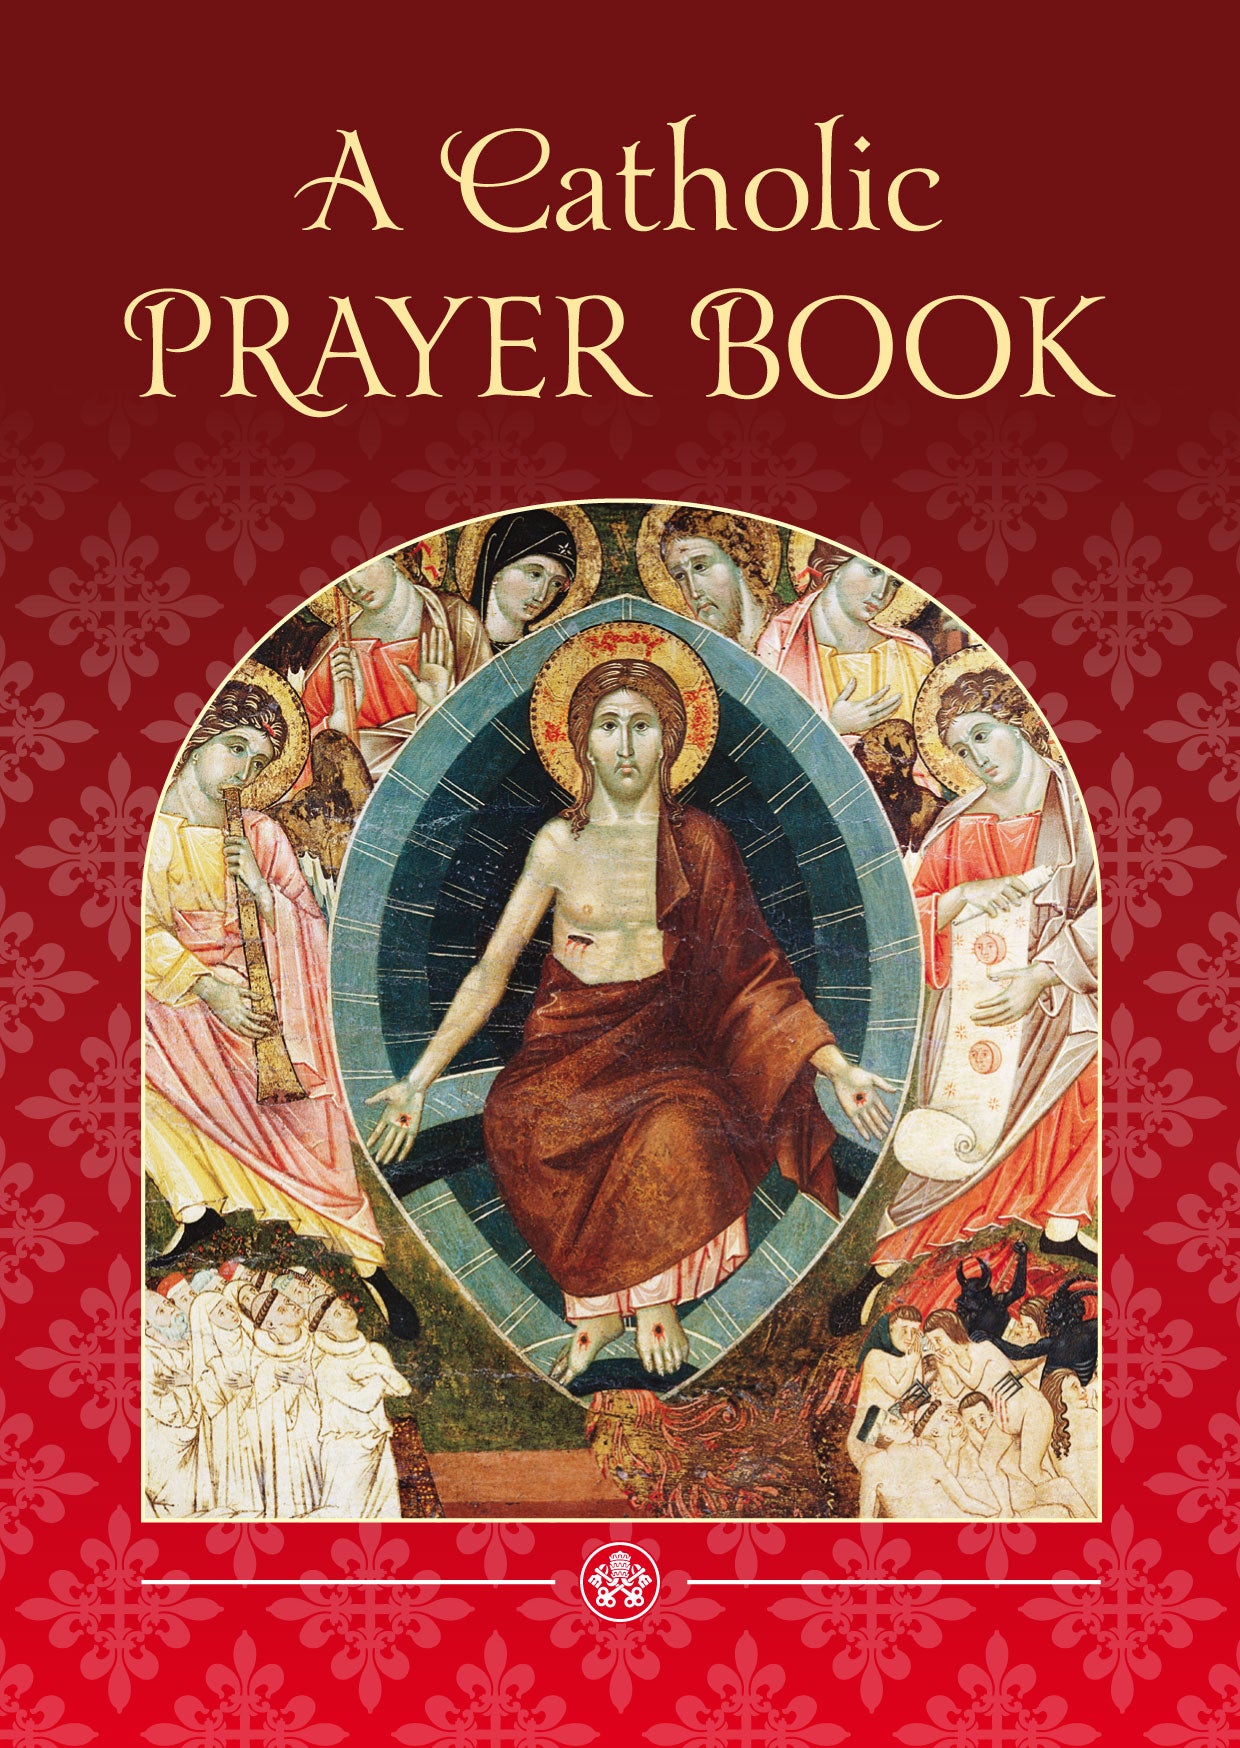 Image of A Catholic Prayer Book other